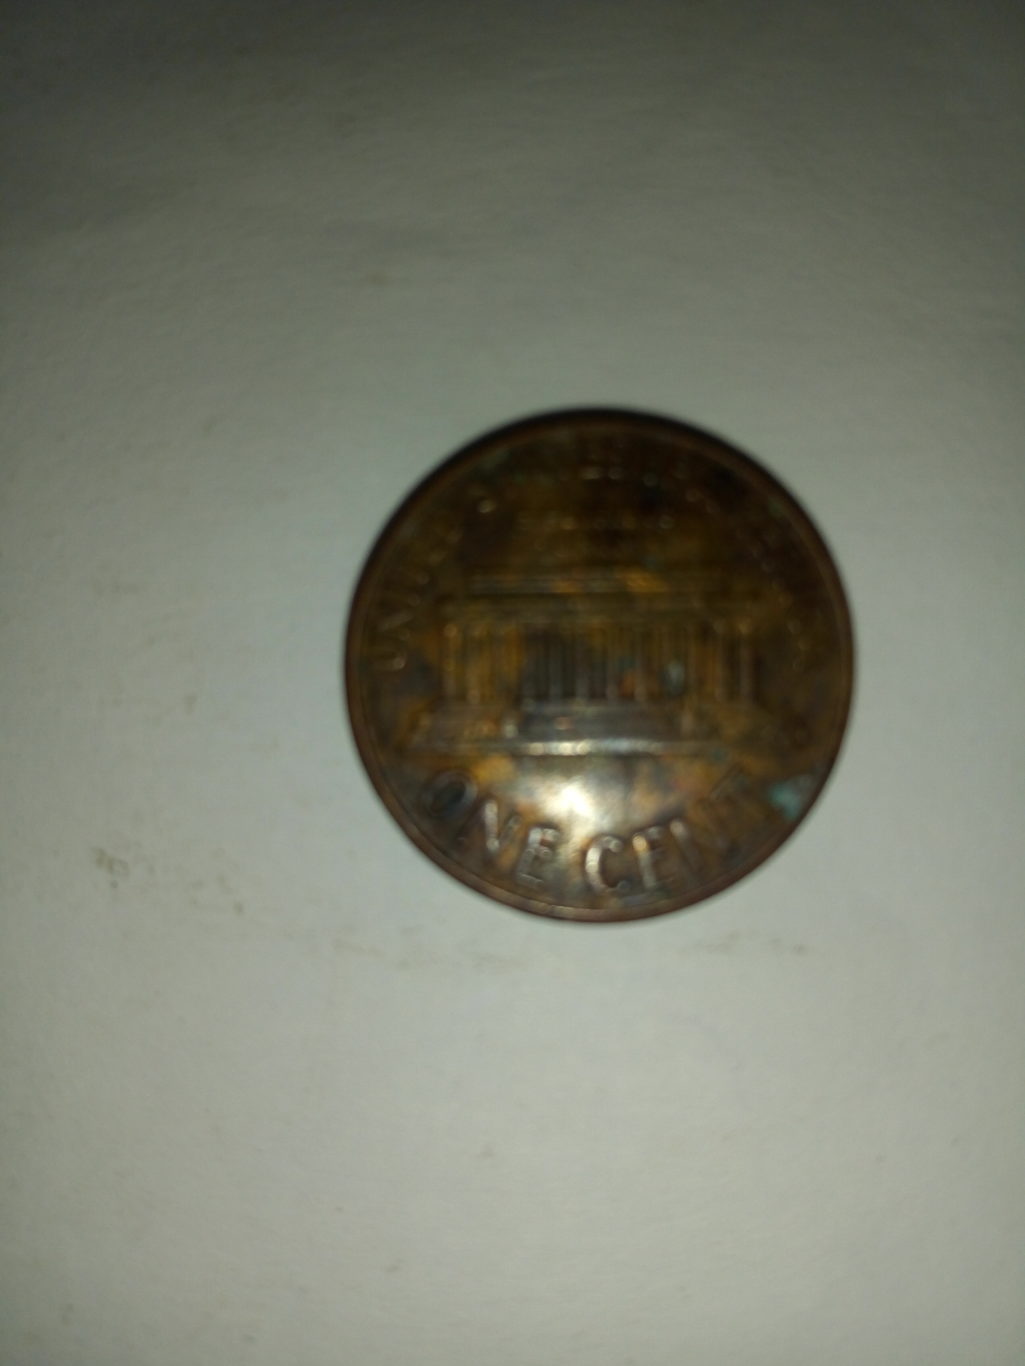 1989_united States of America 1 cent